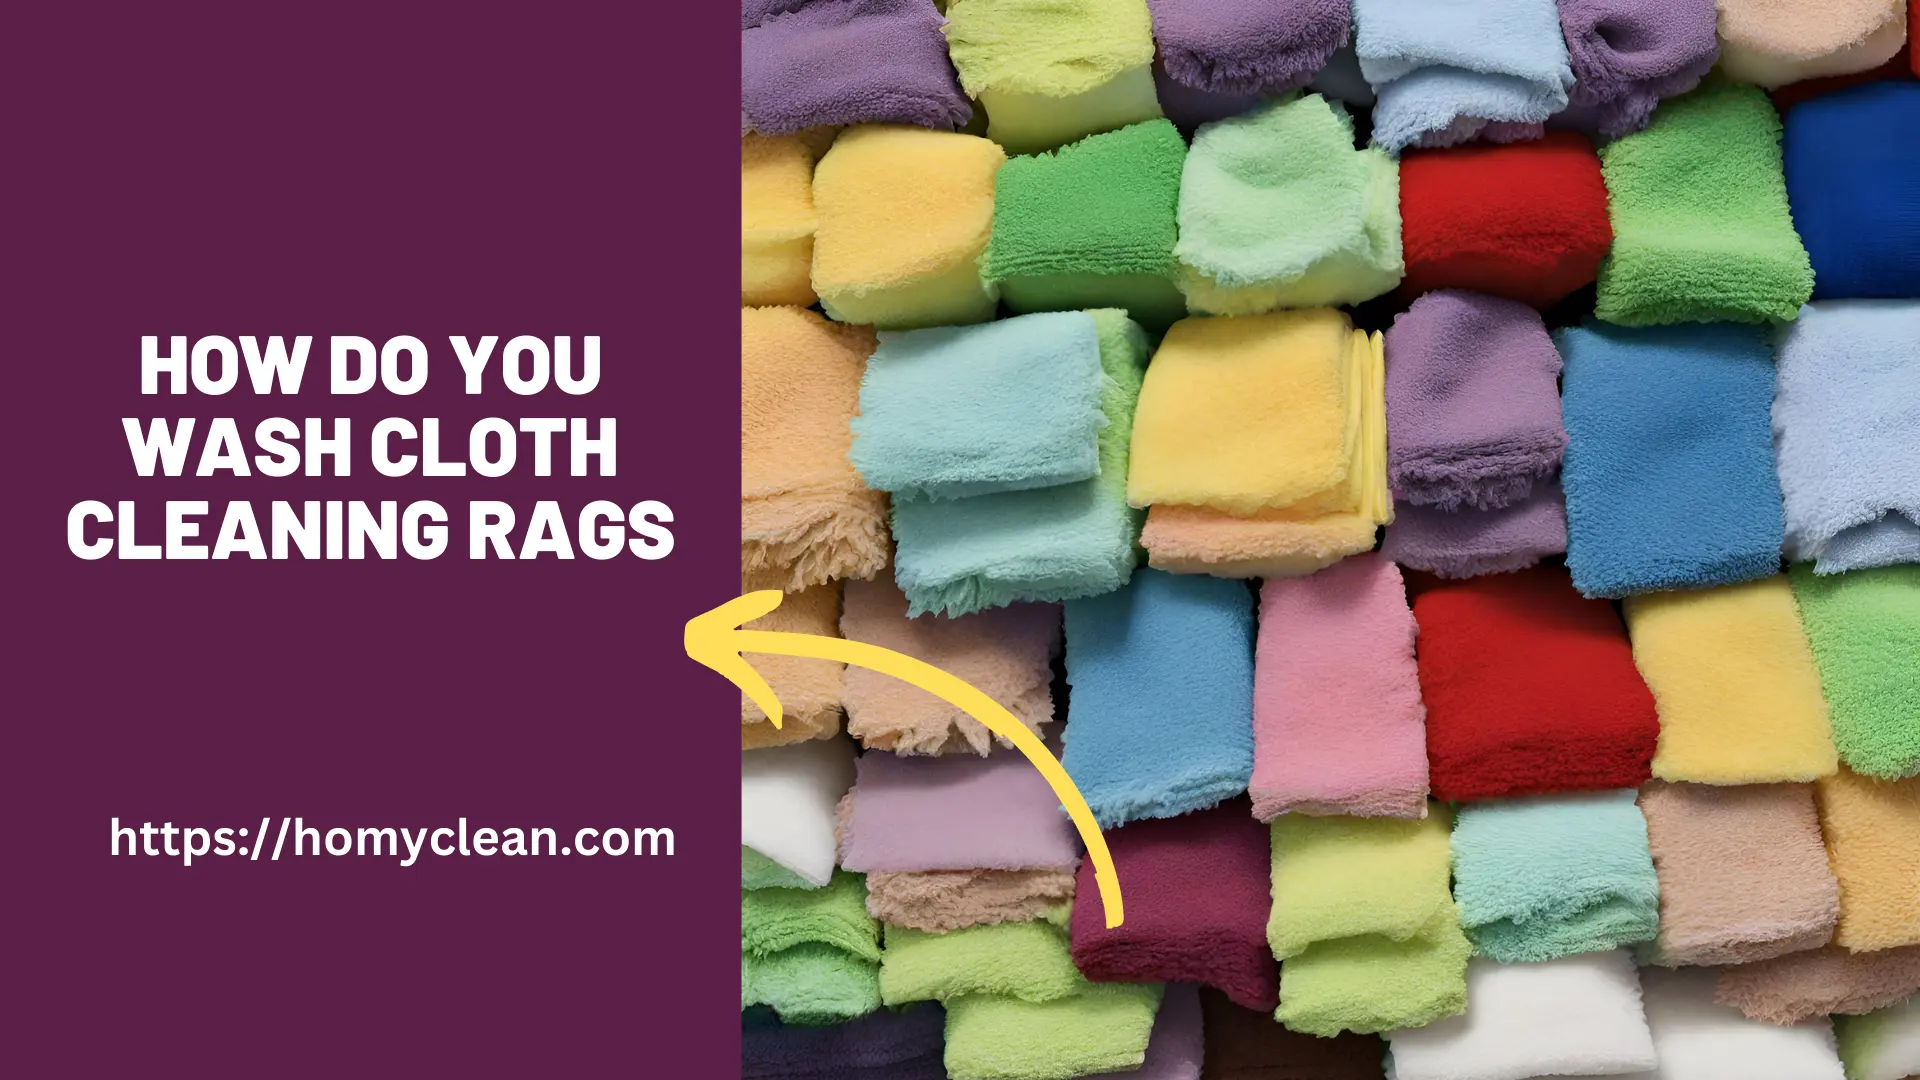 How do you wash cloth cleaning rags